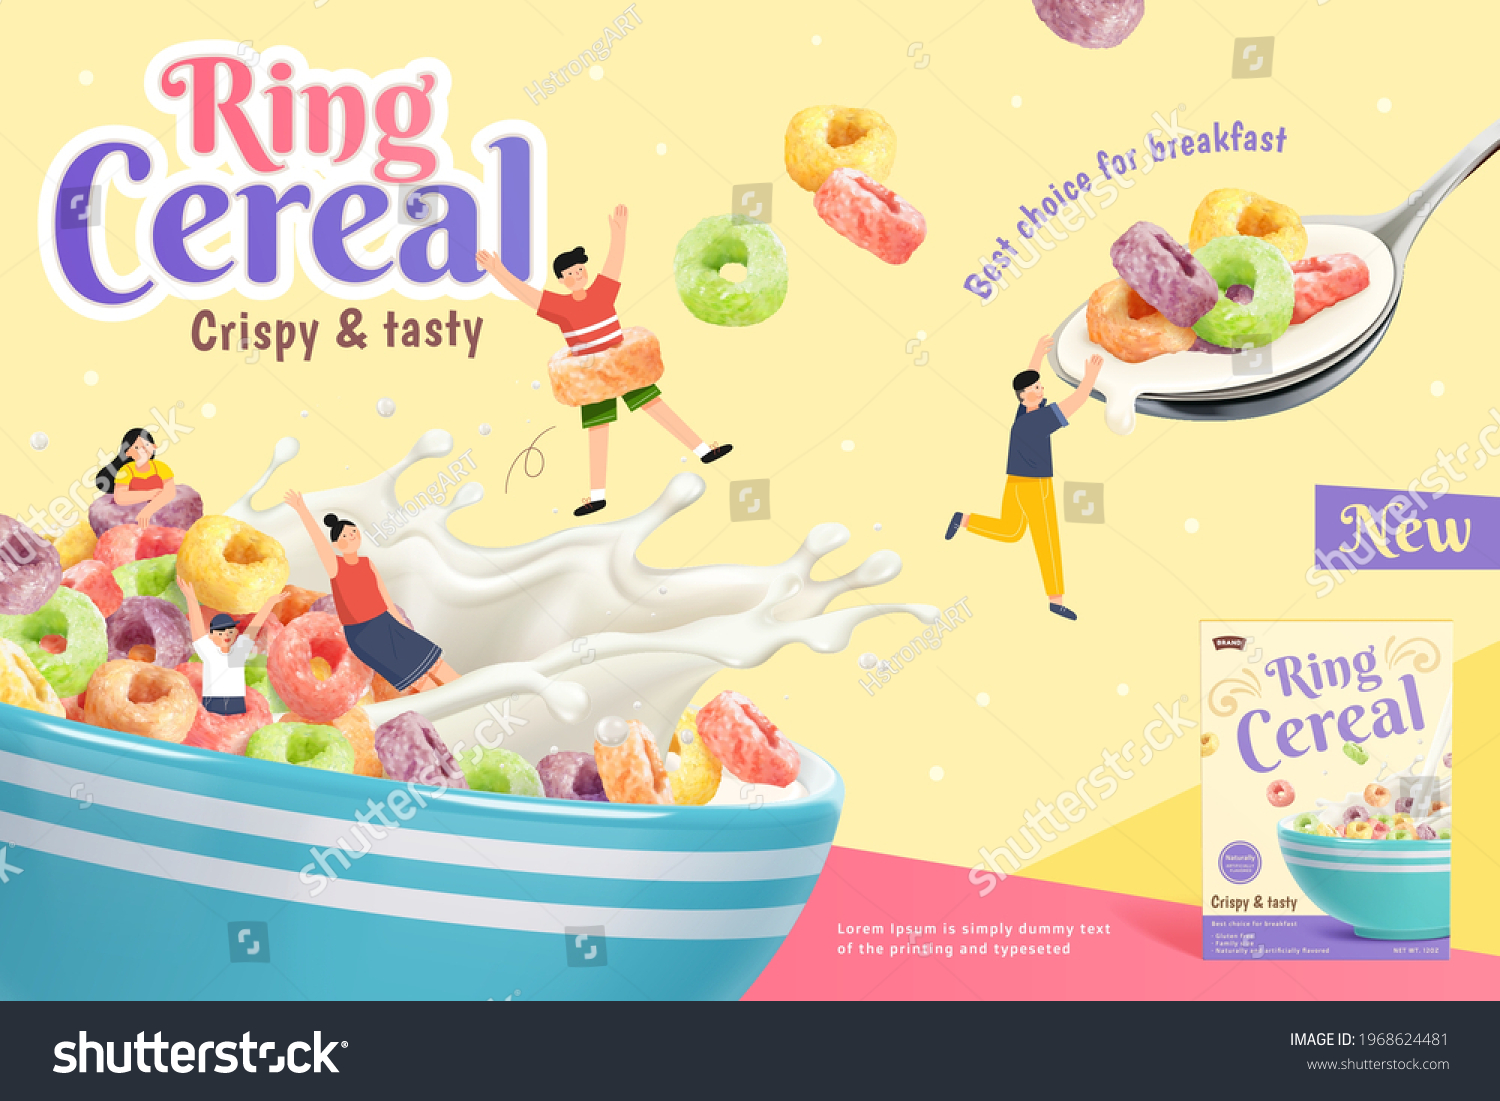 SVG of 3d crispy and tasty ring cereal ad banner. Kids playing in a bowl full of ring cereals and splash of milk. Suitable for healthy breakfast. svg